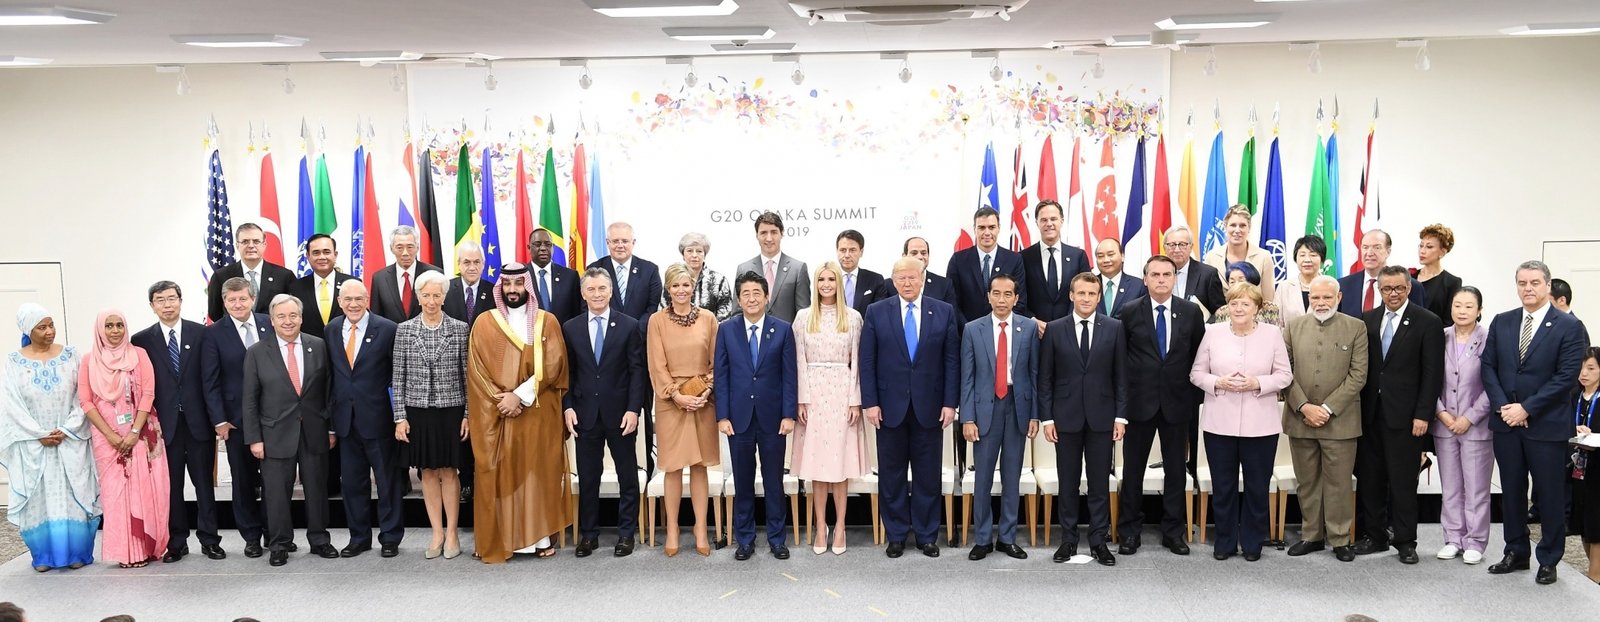 G20 countries leaders at the special session on Women's Empowerment in Osaka, Japan on June 29, 2019